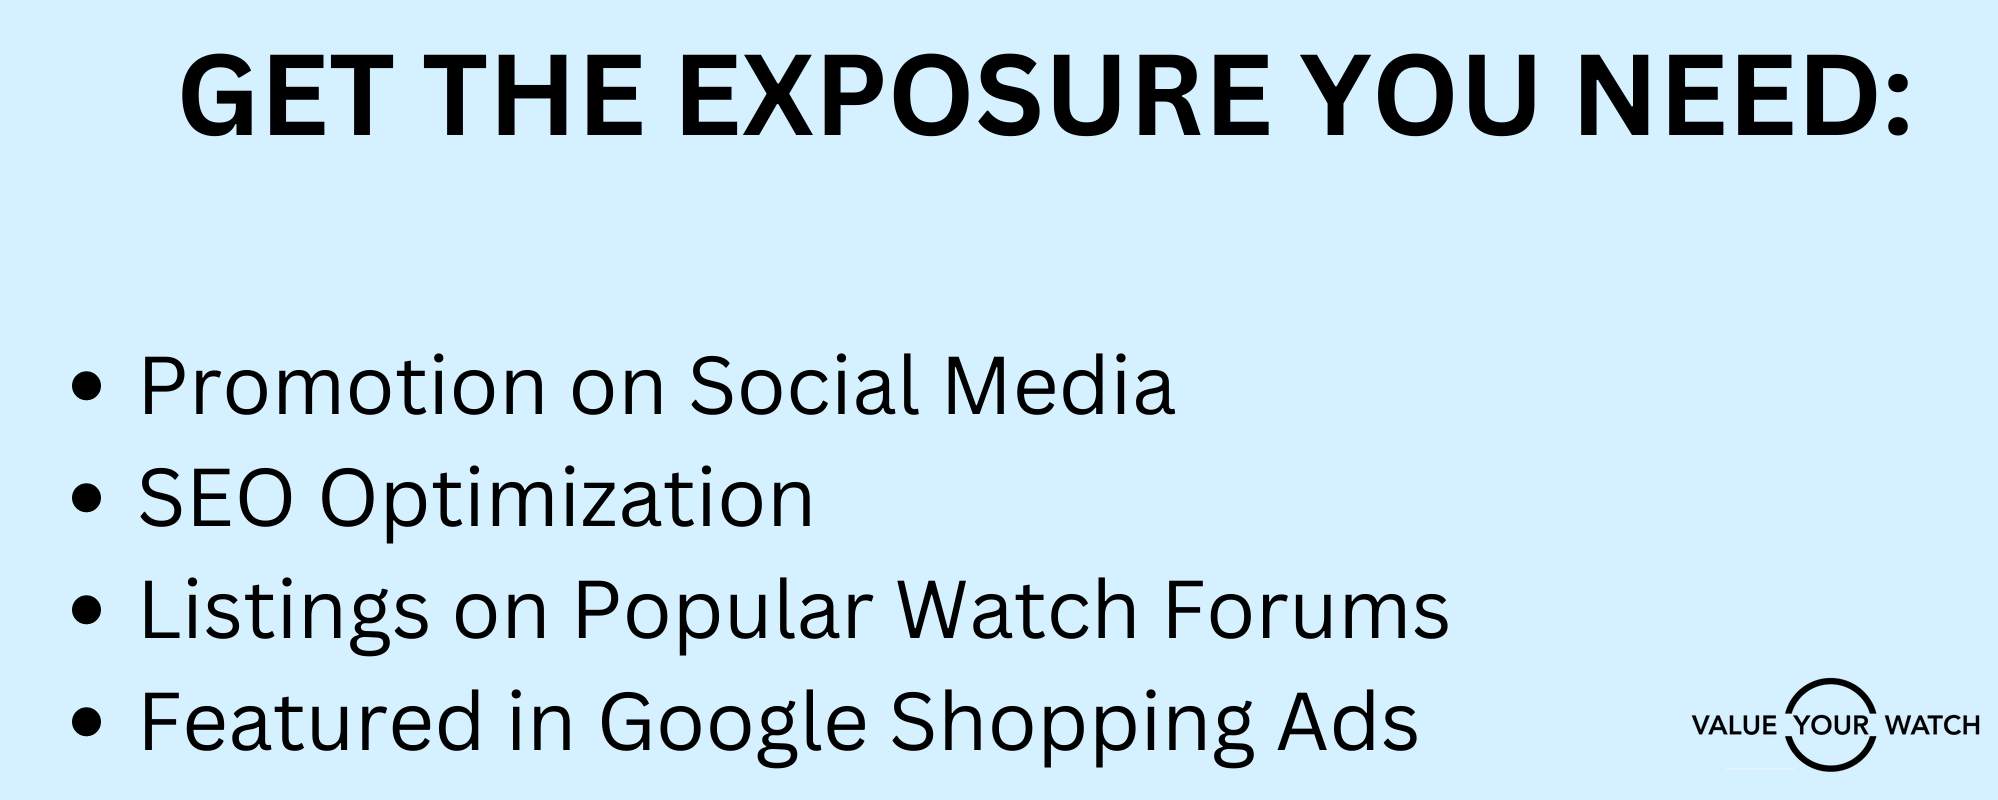 GET THE EXPOSURE YOU NEED: